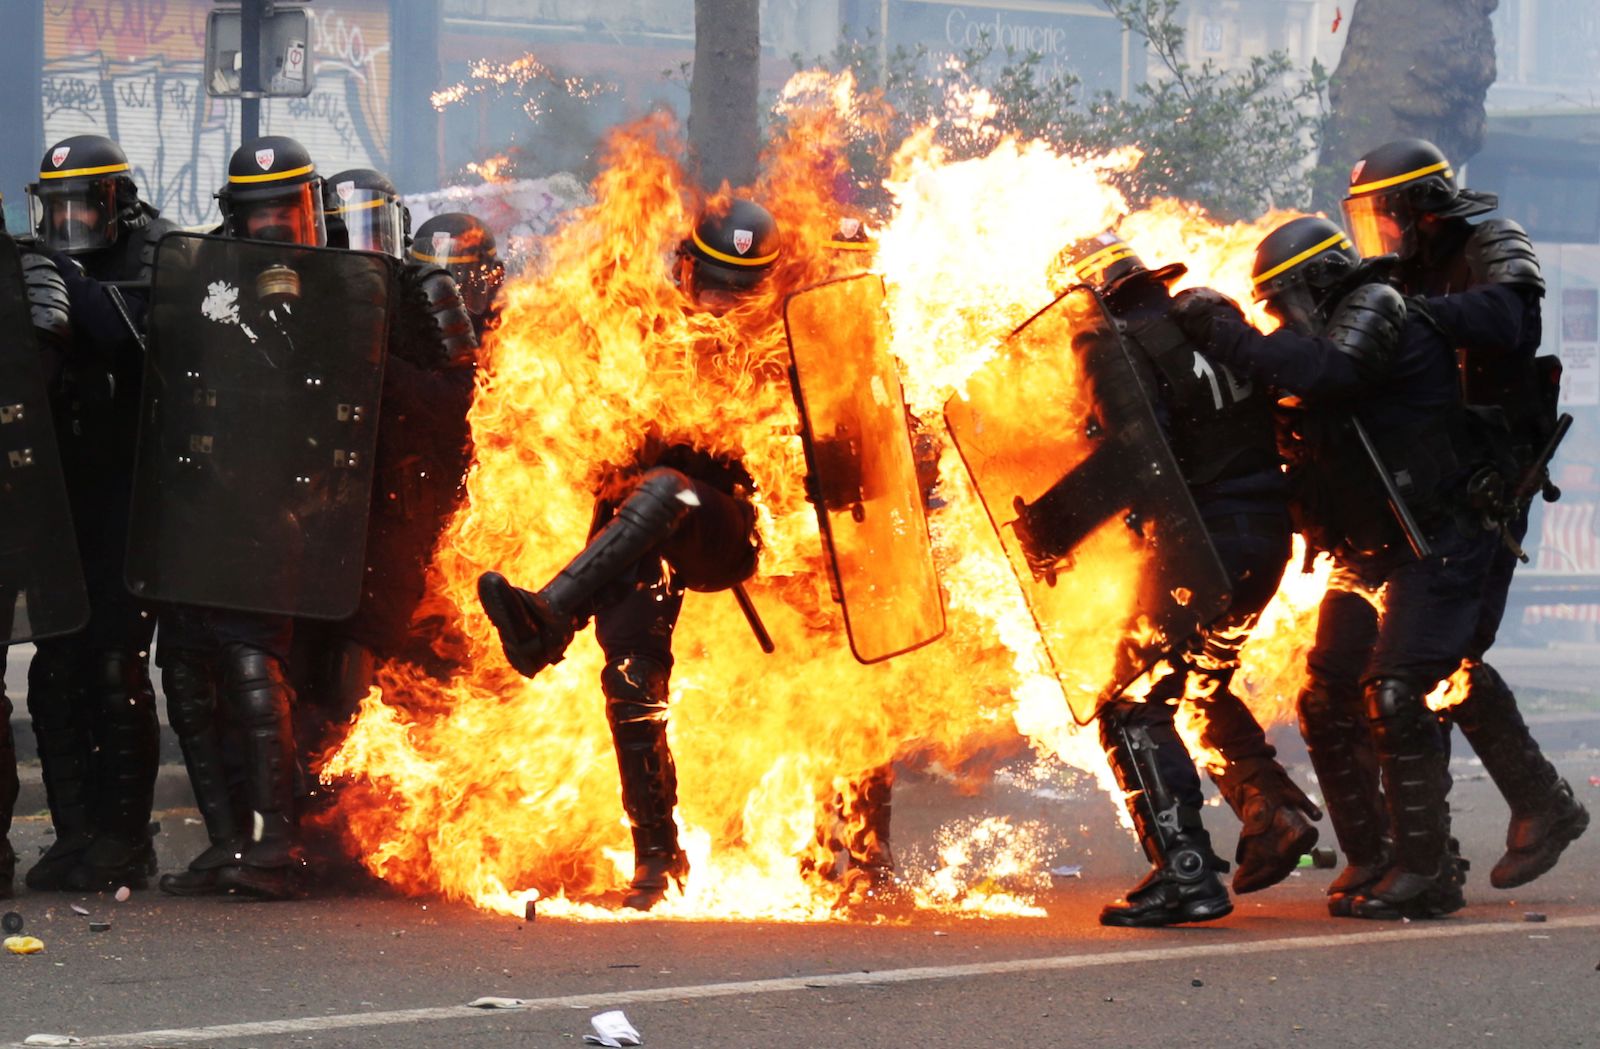 The Story Behind this Viral Photo of a French Policeman on Fire